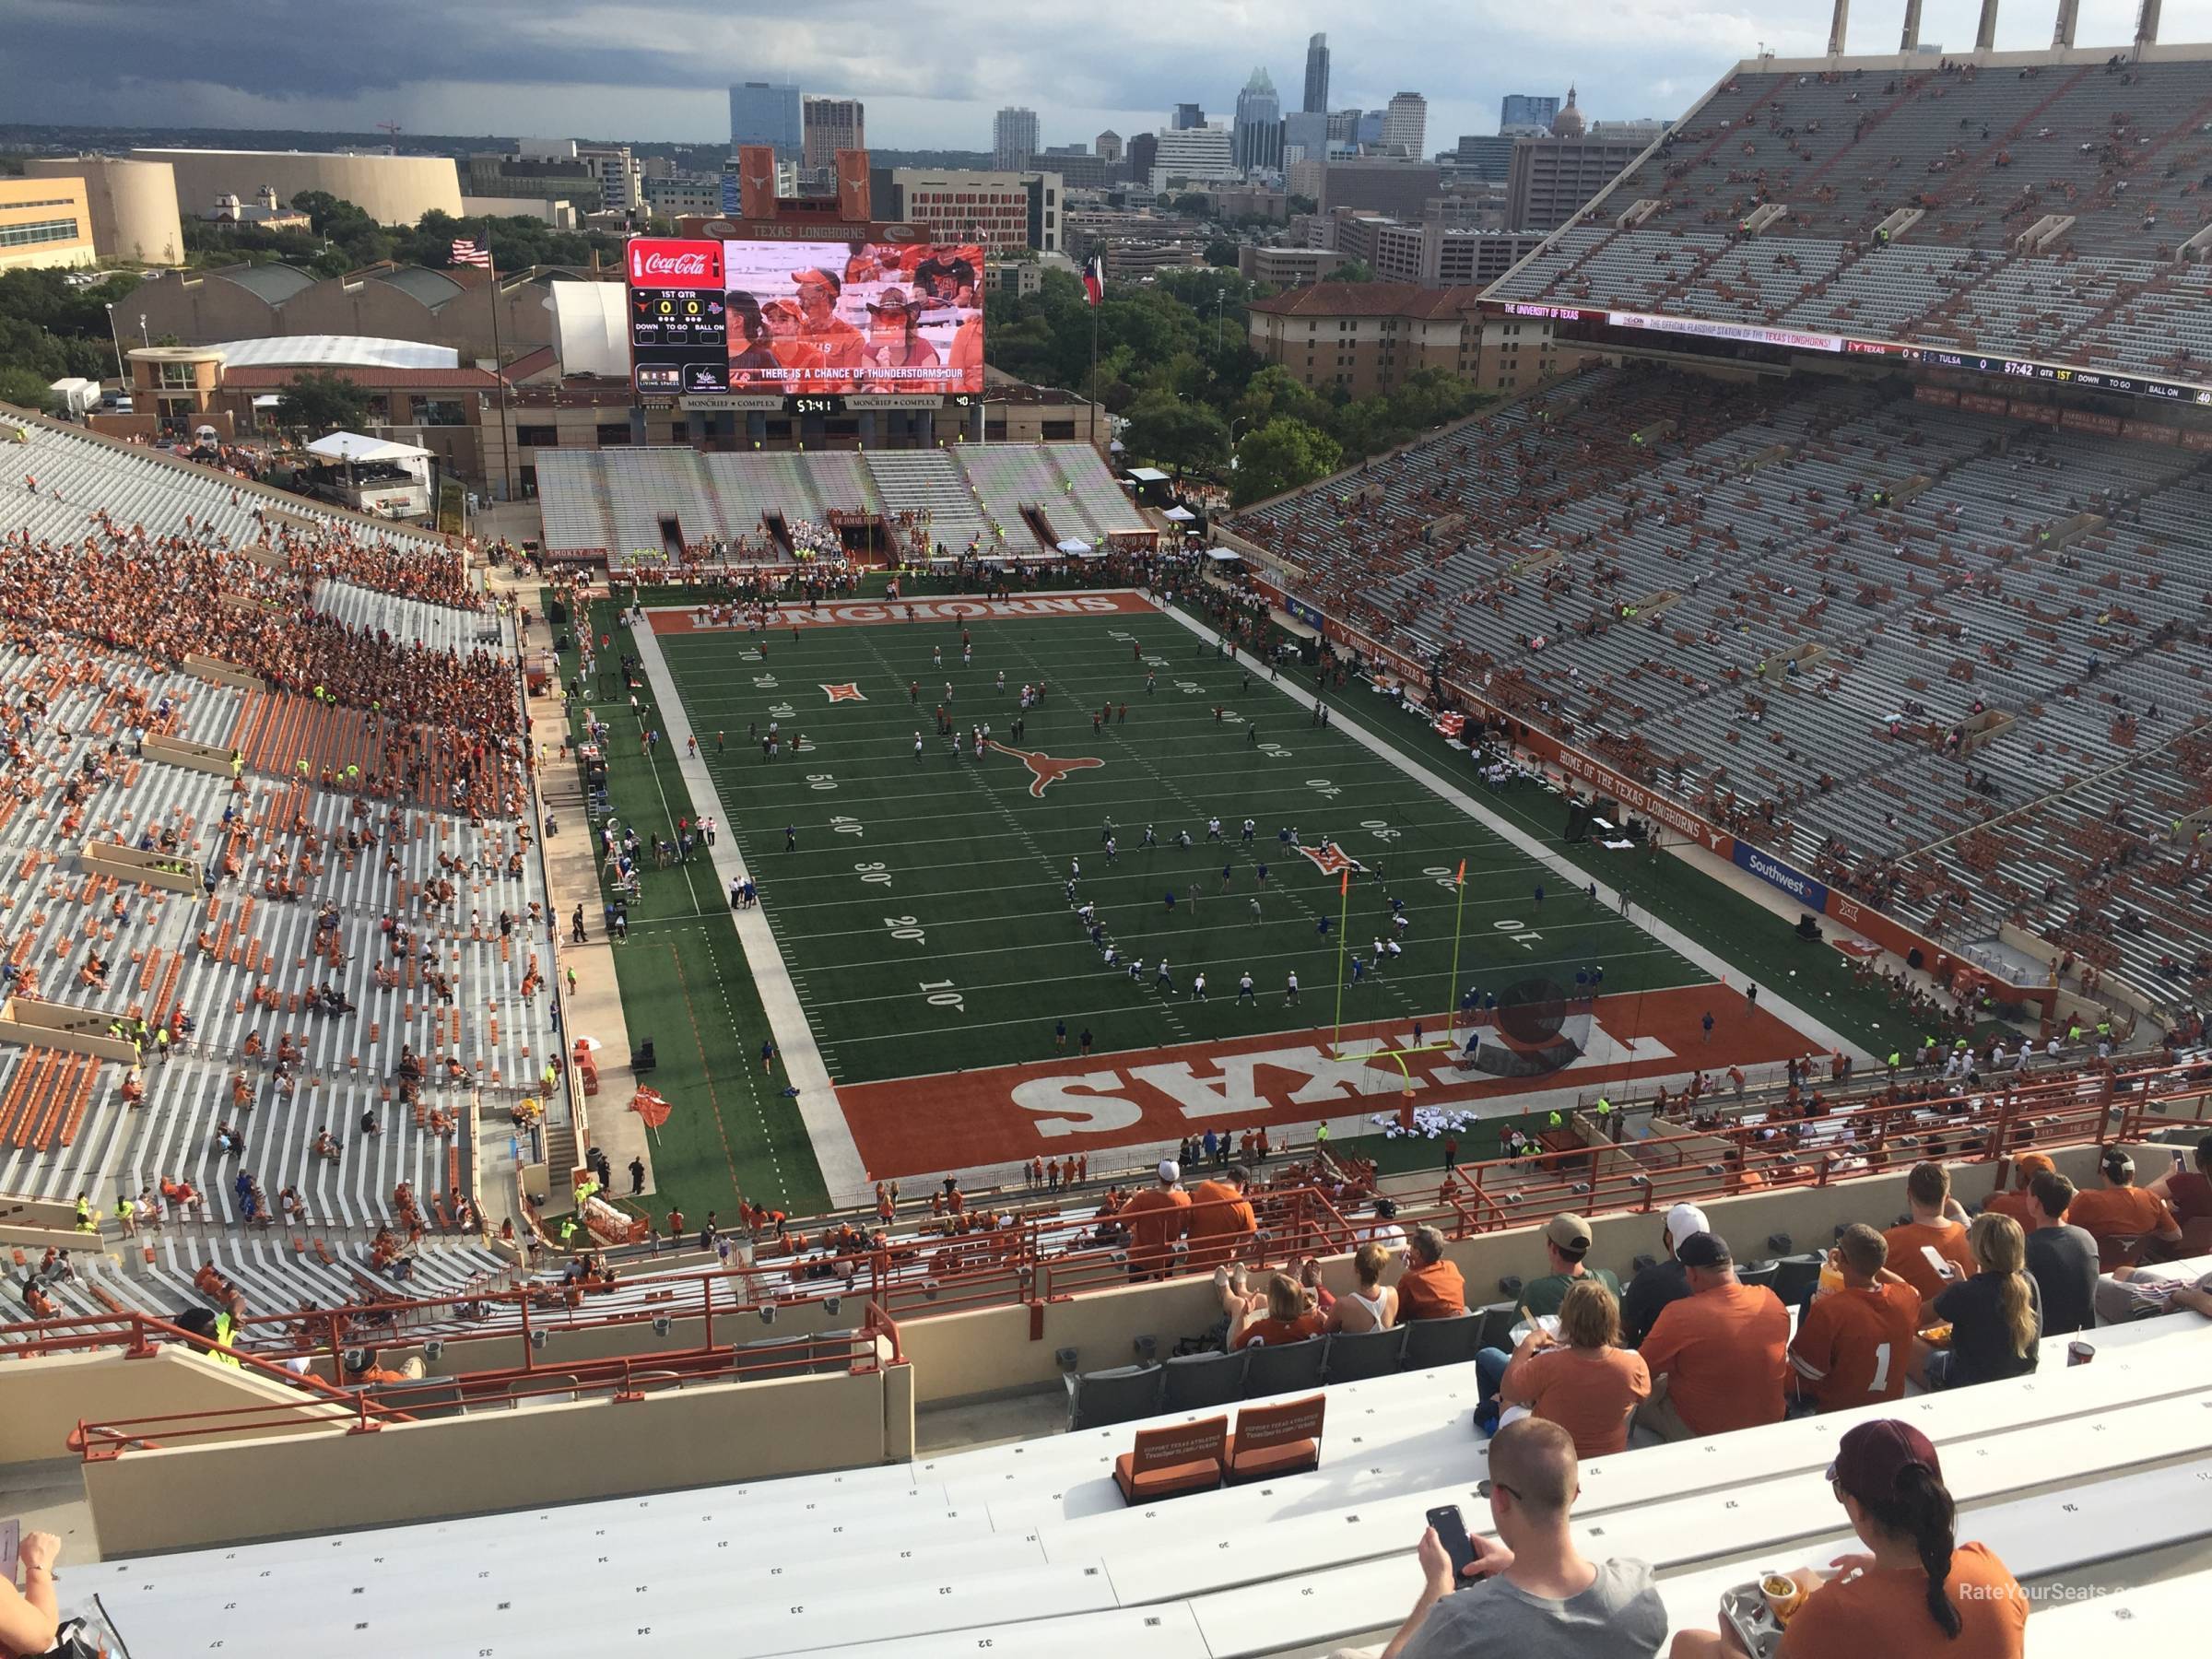 section 117, row 20 seat view  - dkr-texas memorial stadium